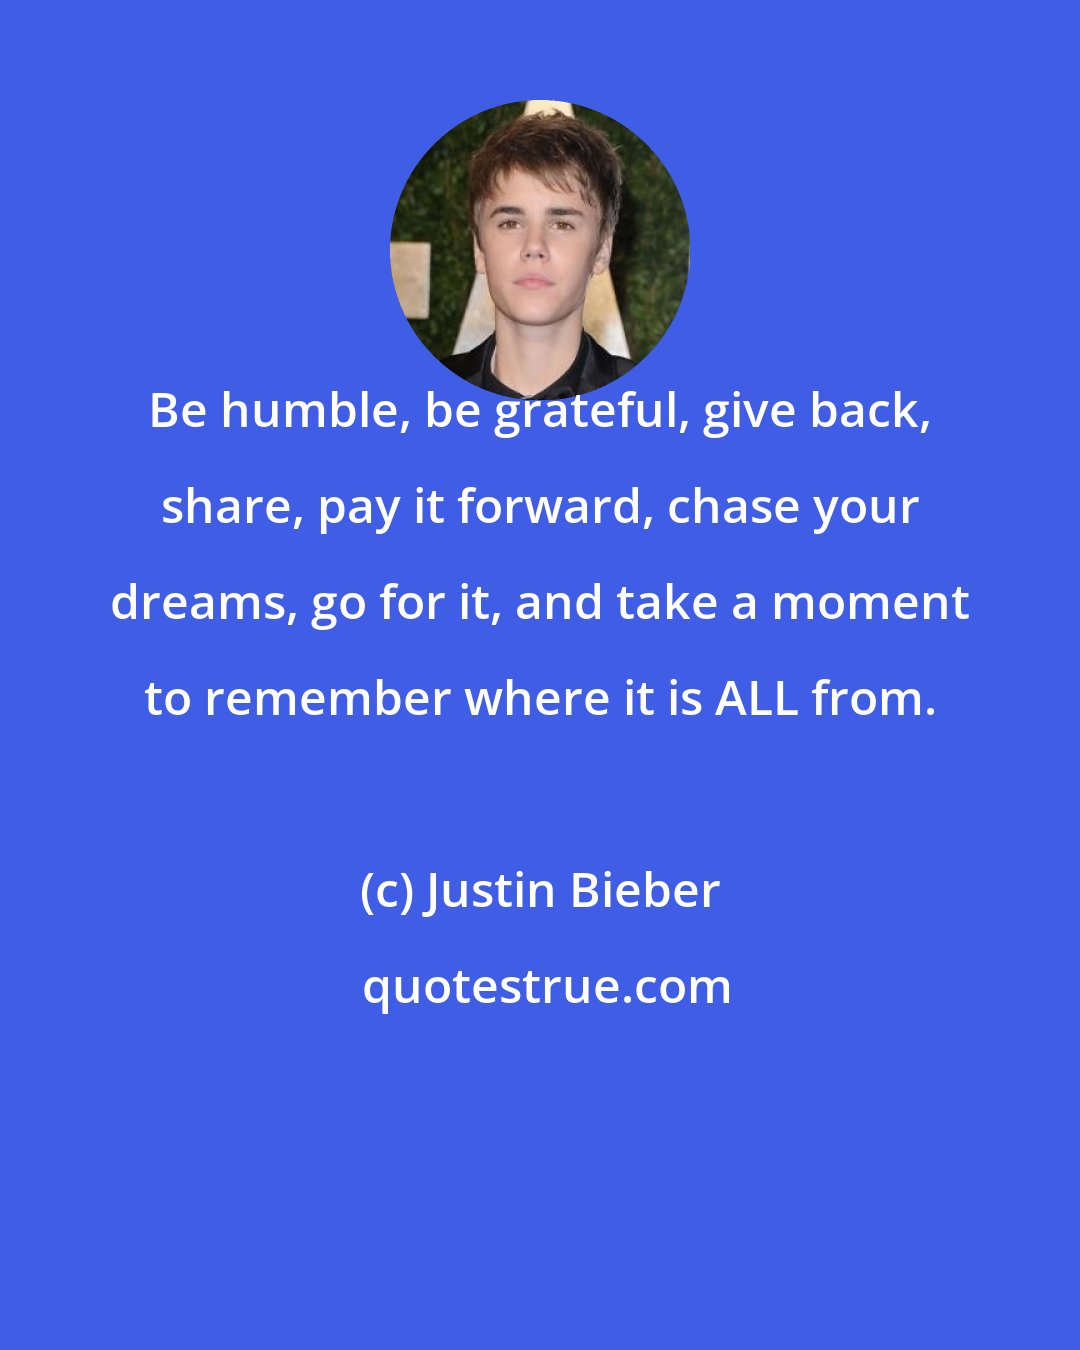 Justin Bieber: Be humble, be grateful, give back, share, pay it forward, chase your dreams, go for it, and take a moment to remember where it is ALL from.